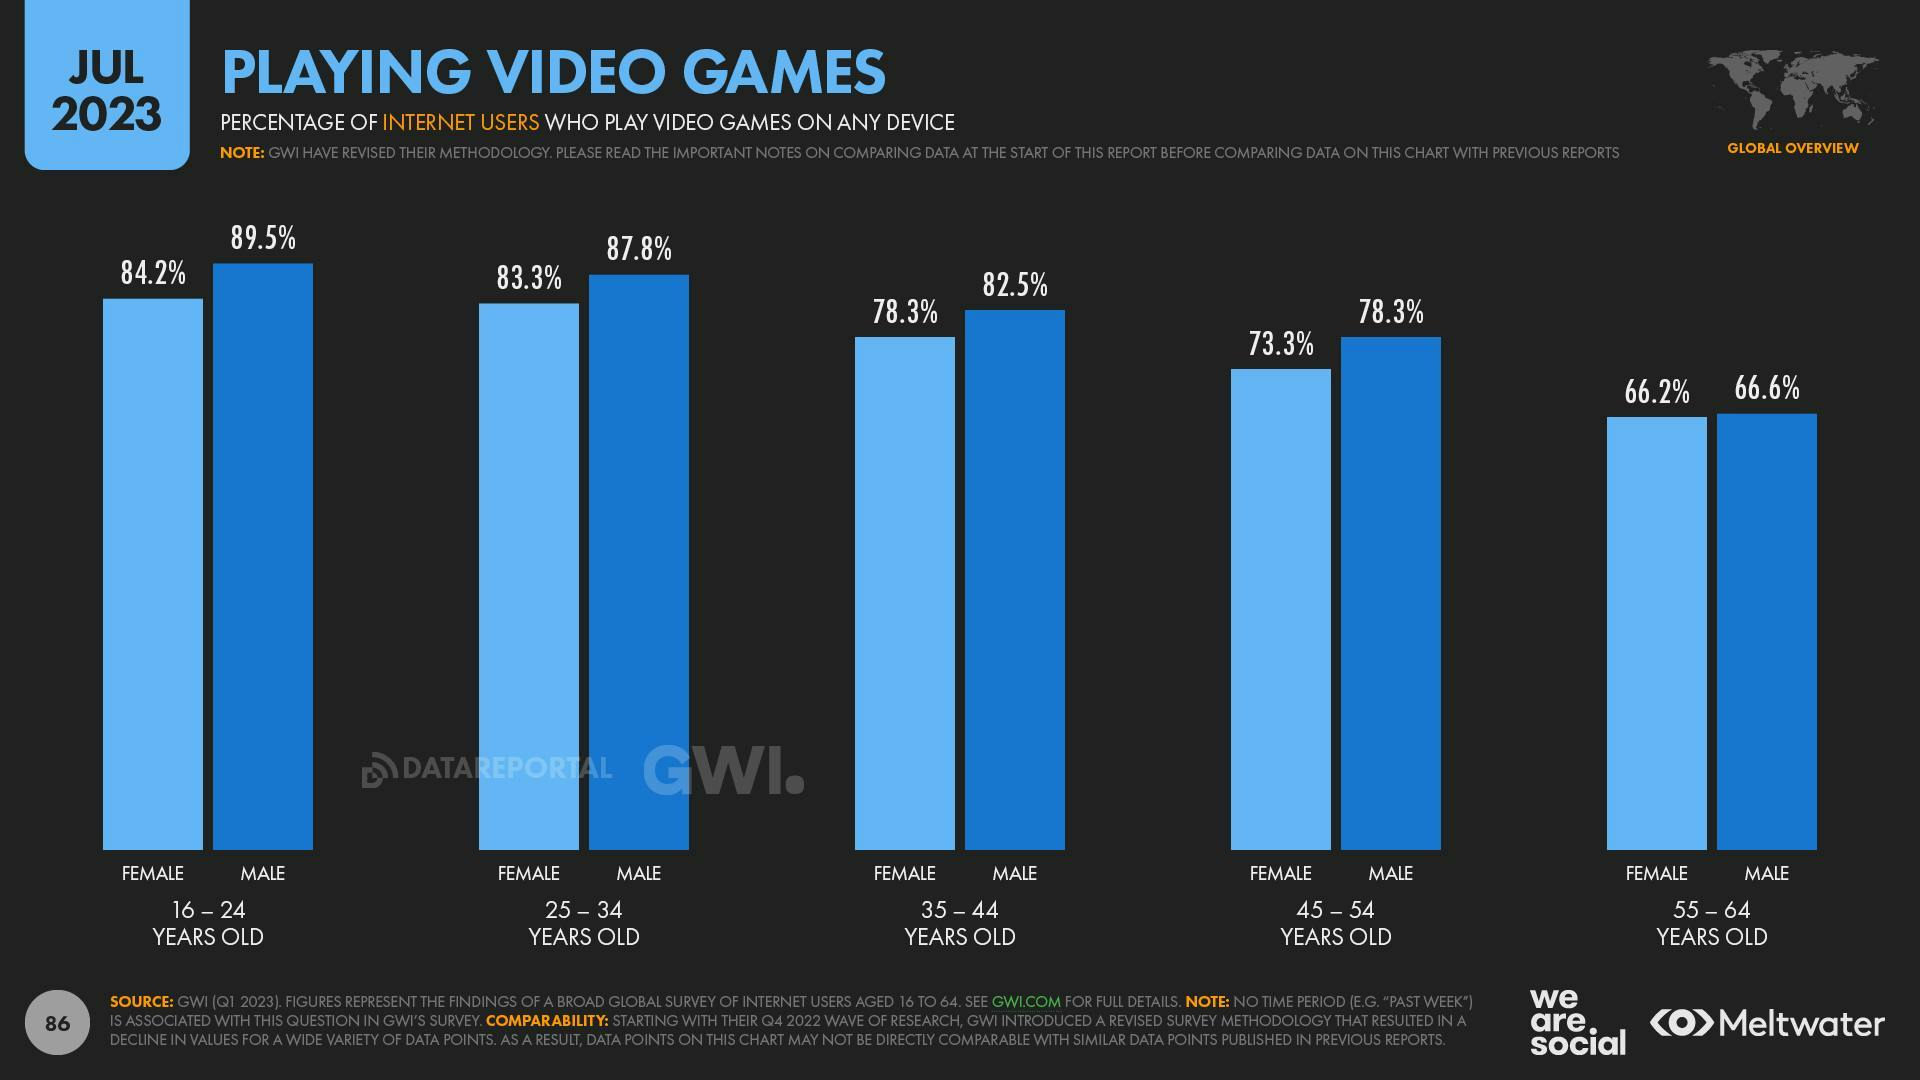 Playing video games by gender and age group